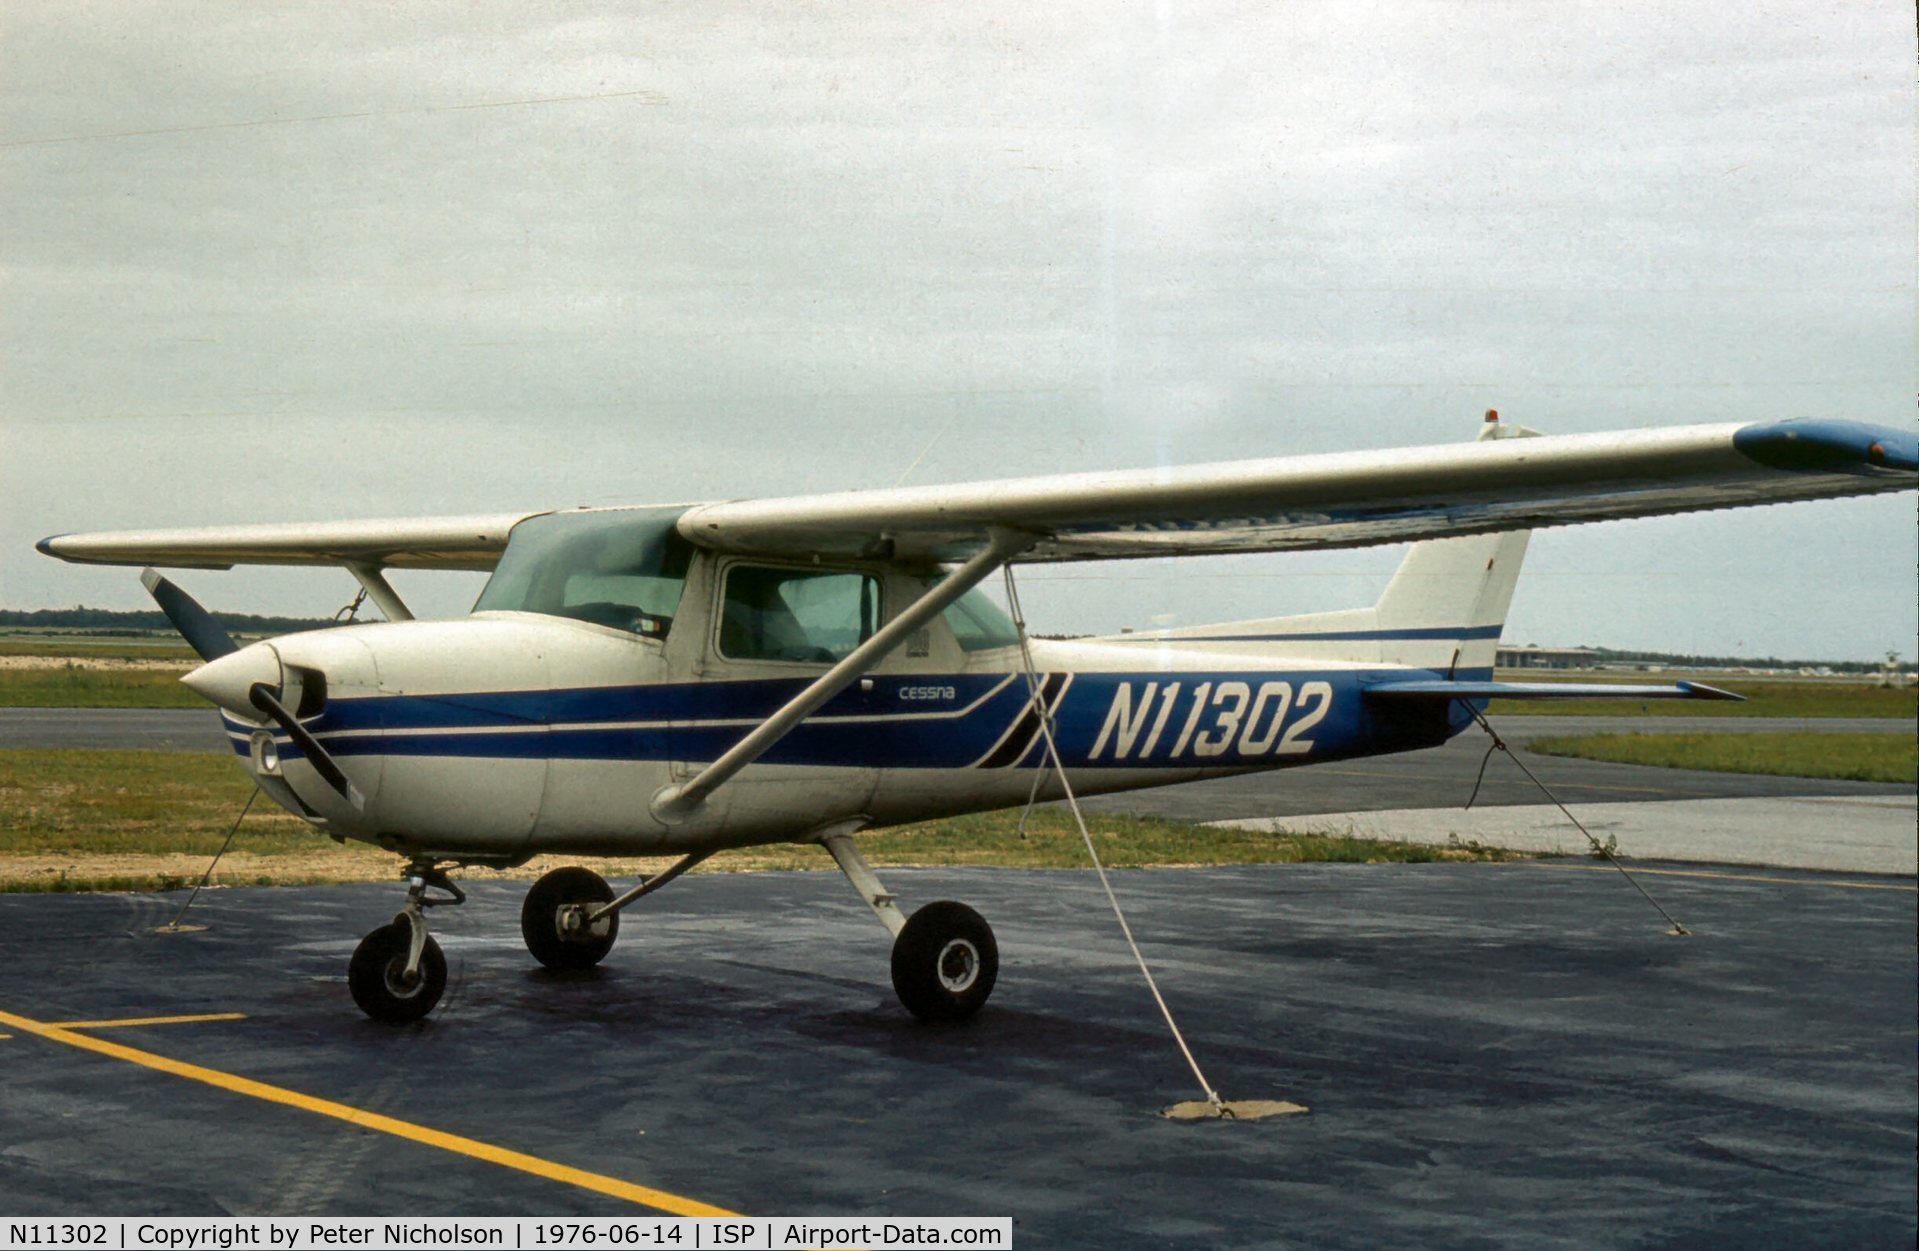 N11302, 1973 Cessna 150L C/N 15075311, This Cessna Commuter was parked at Islip-MacArthur in the summer of 1976.